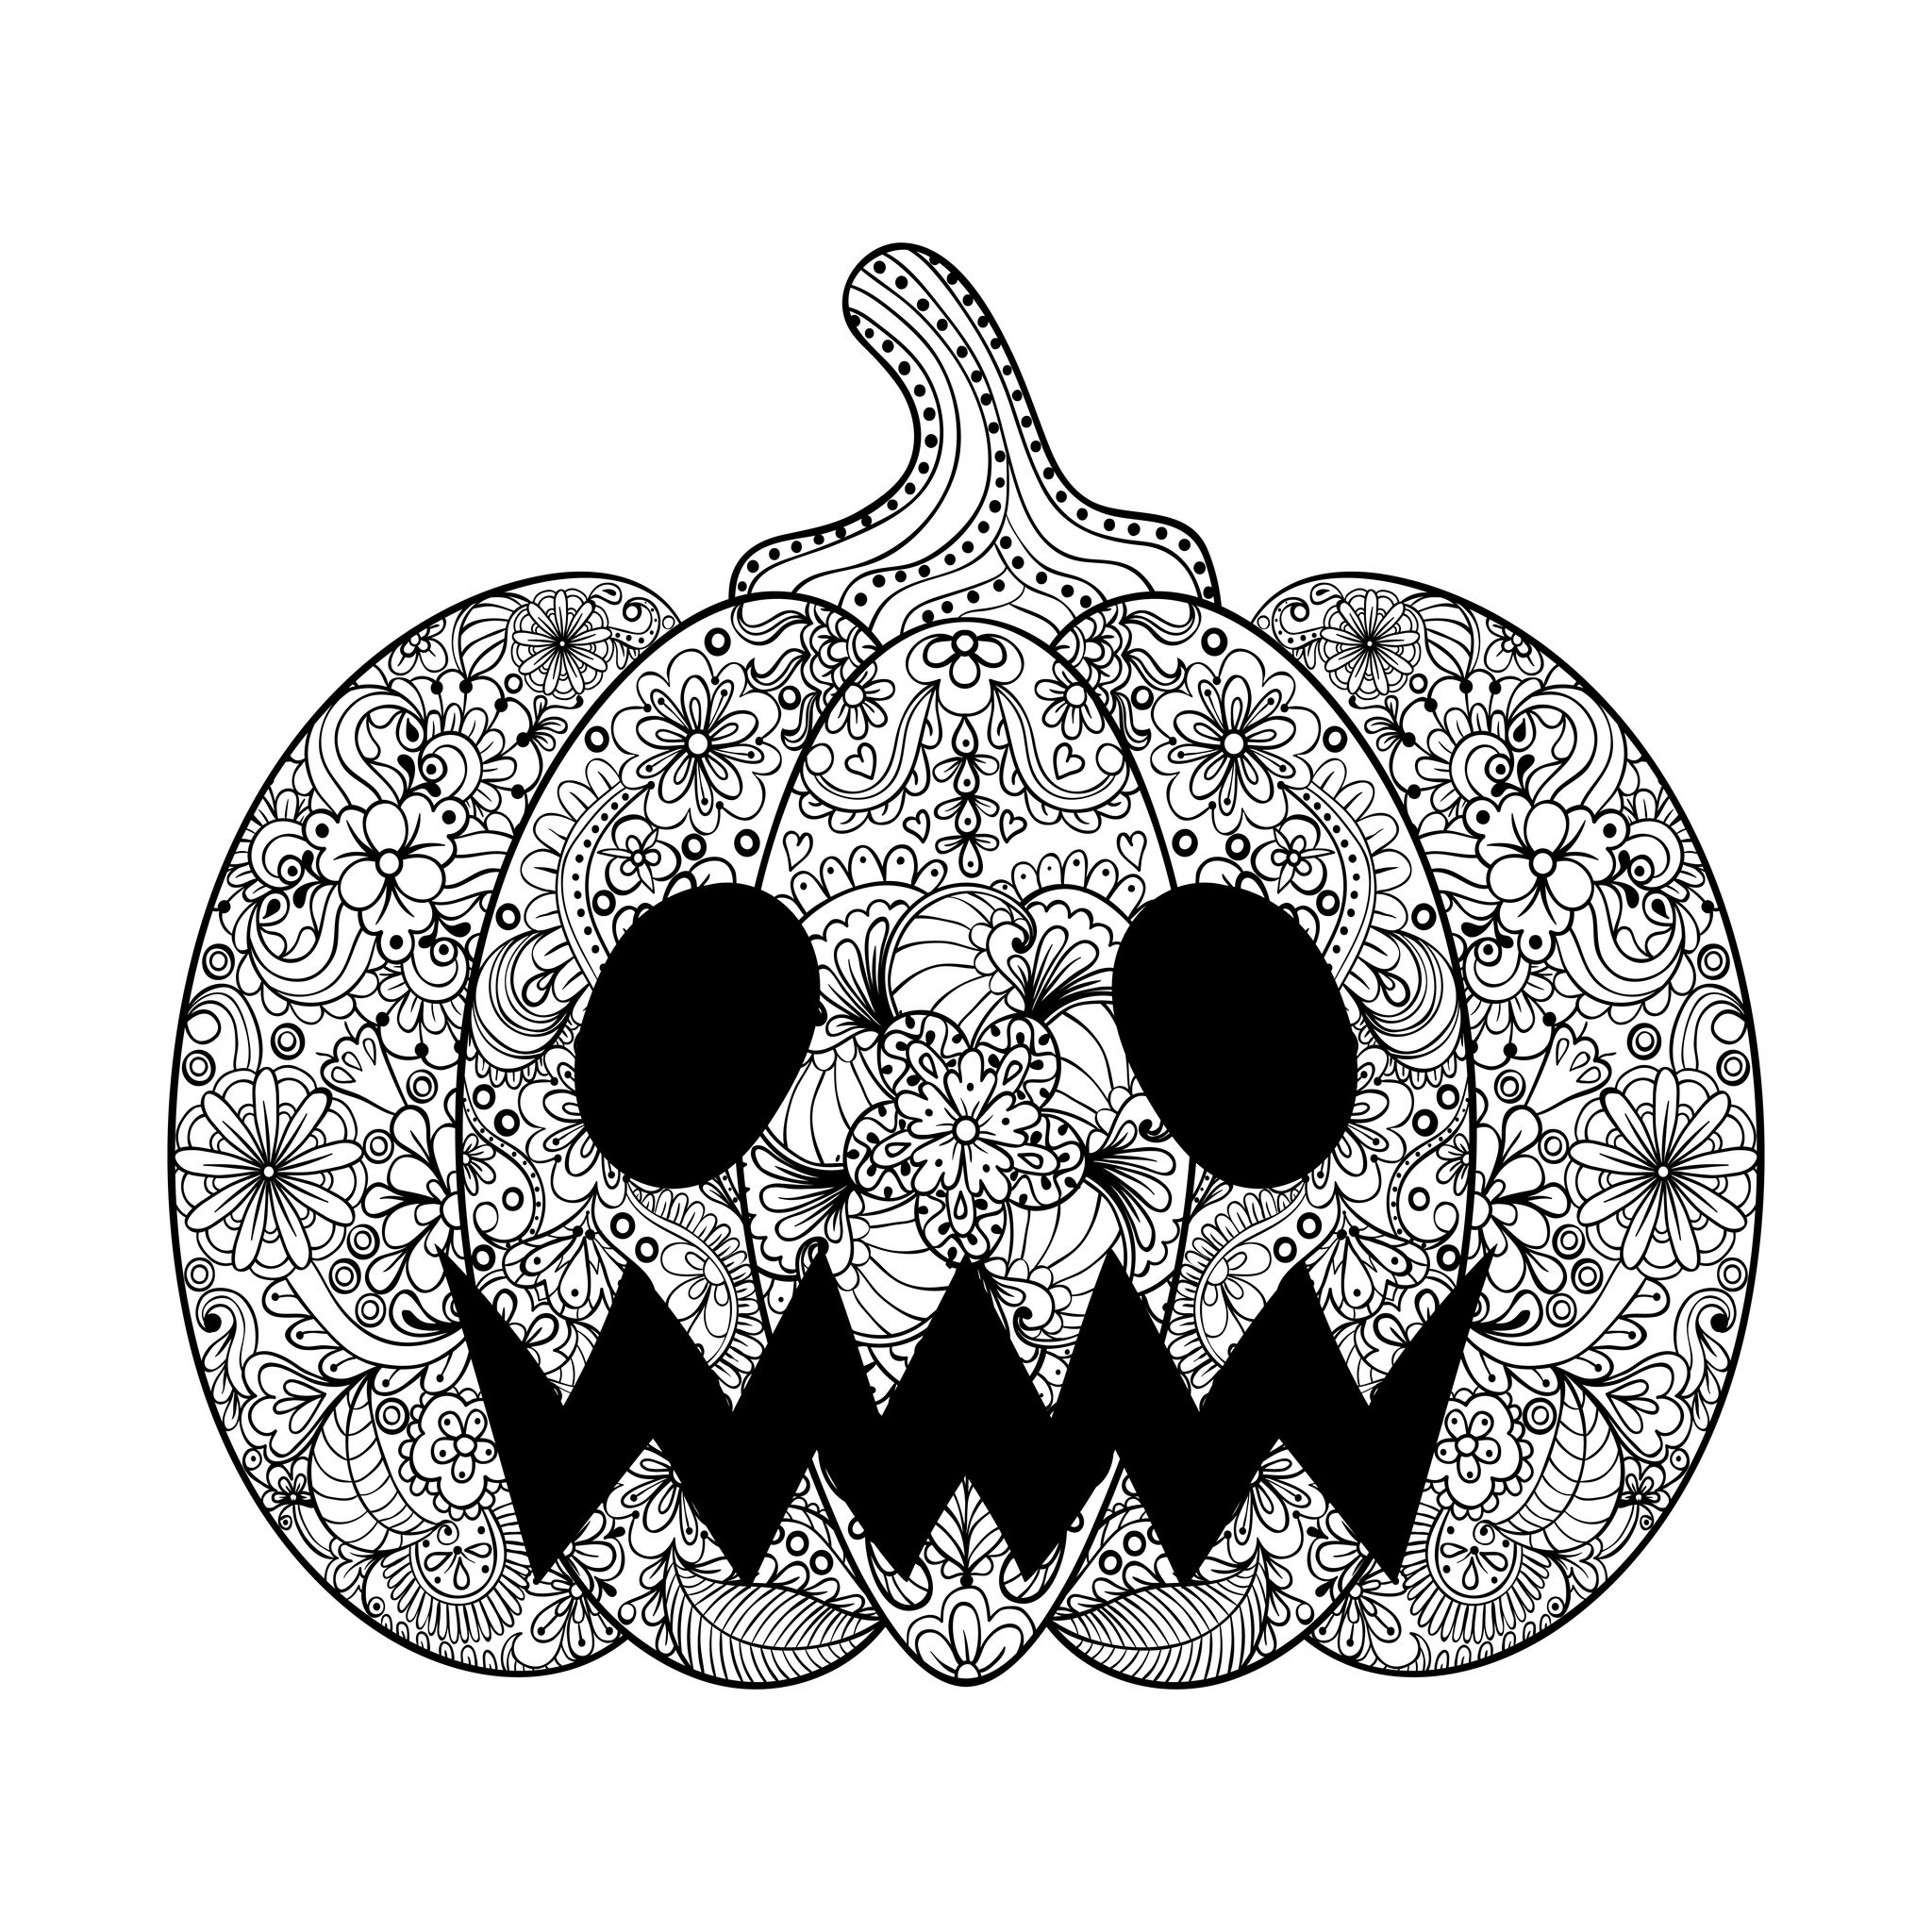 Halloween Pumpkin Coloring Pages Printables Halloween Scary Pumpkin Halloween Adult Coloring Pages